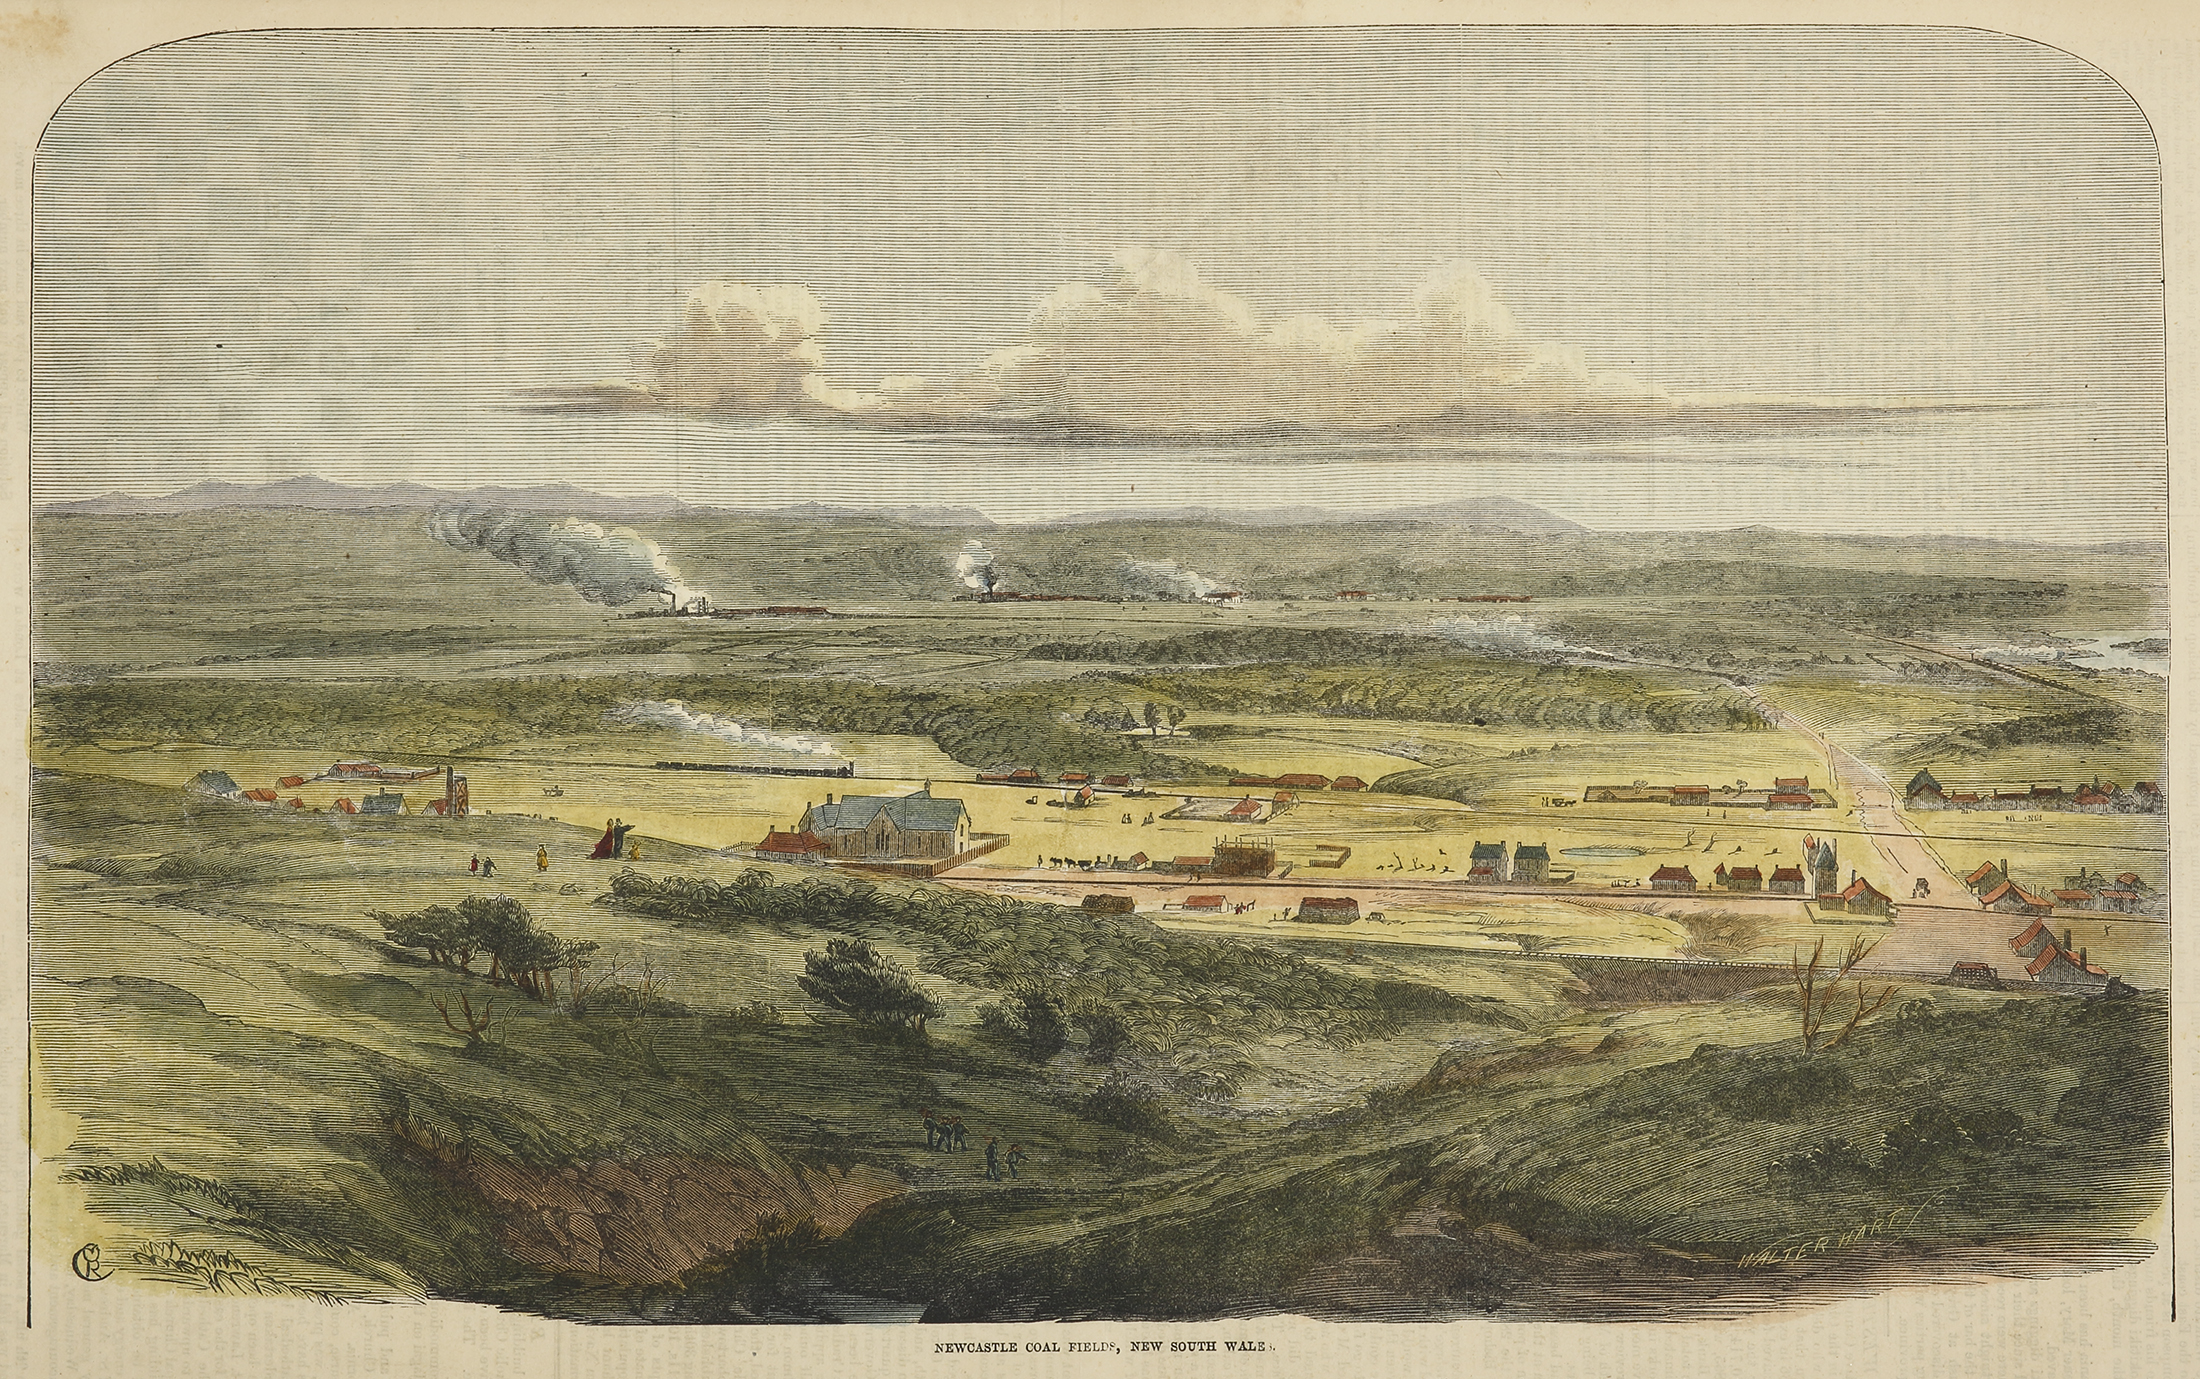 Newcastle Coal Fields, New South Wales. - Antique View from 1865